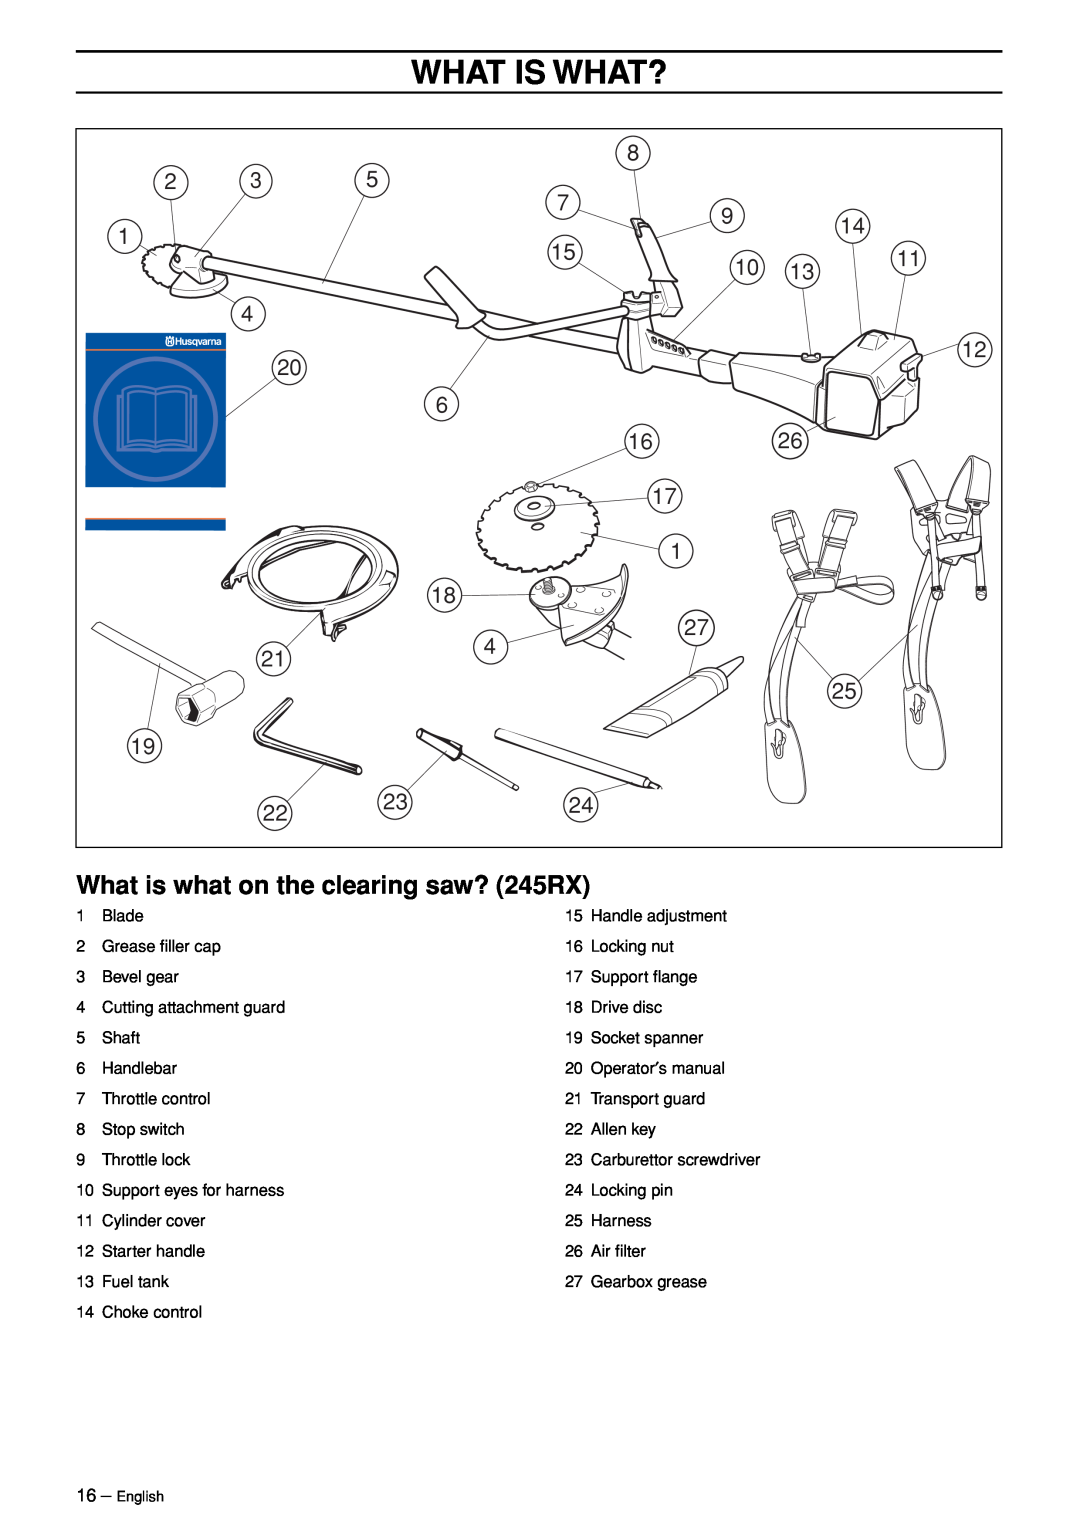 Husqvarna manual What is what on the clearing saw? 245RX, What Is What?, Carburettor screwdriver, English 